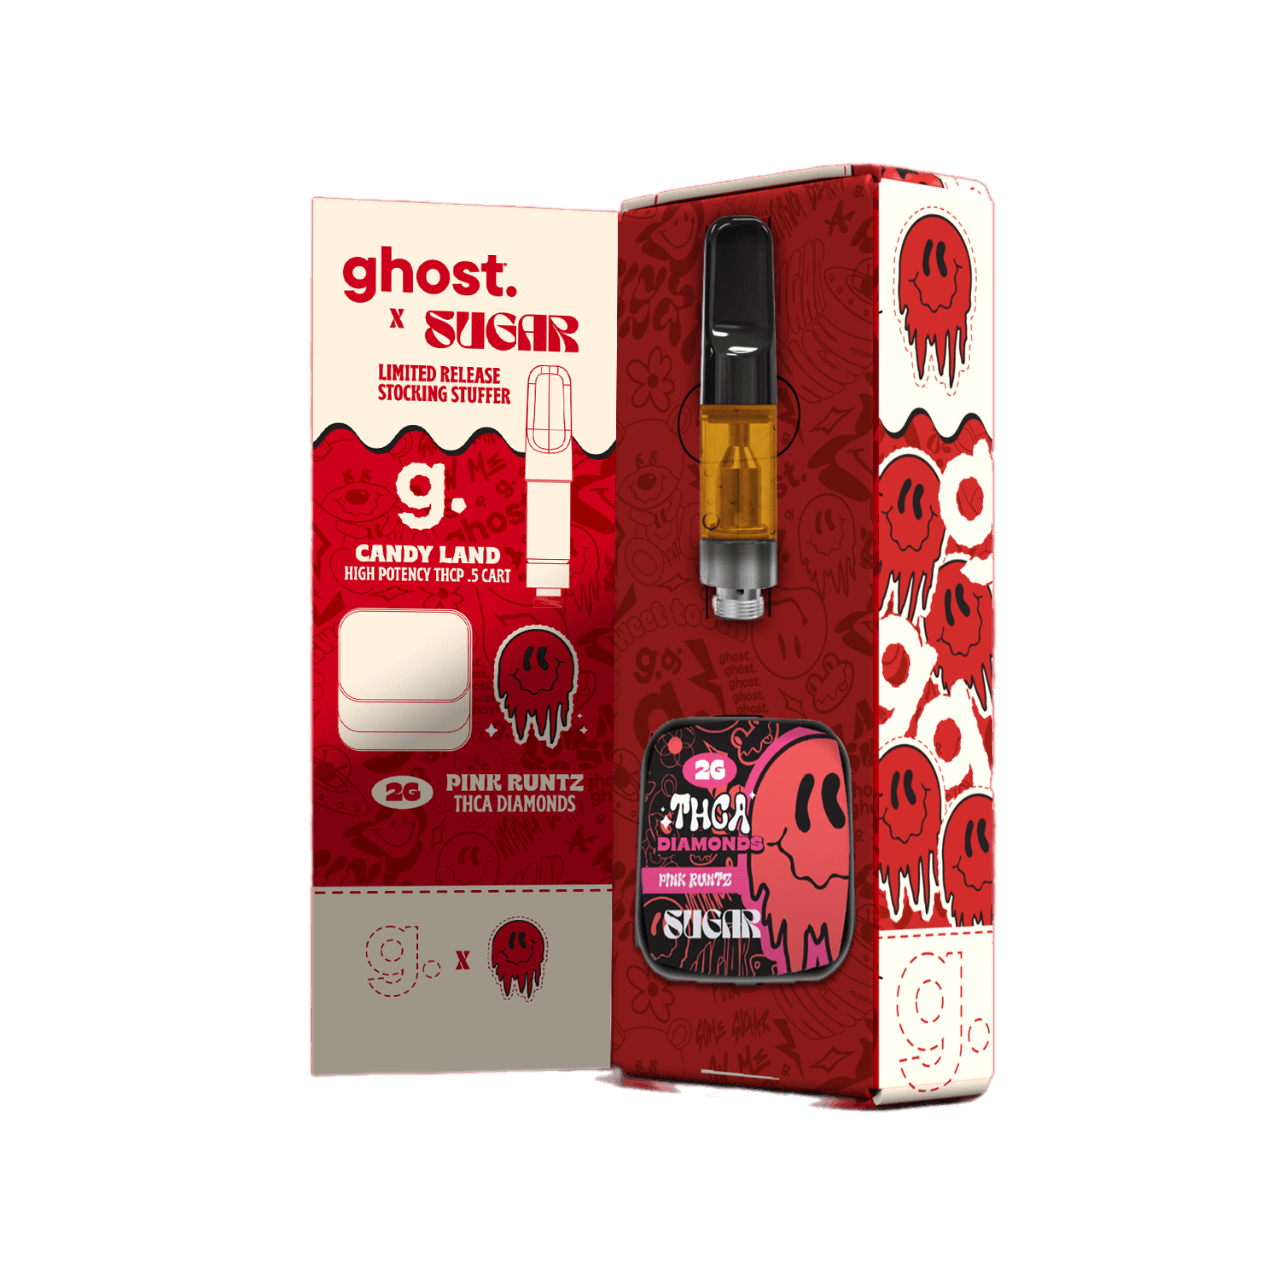 Ghost x Sugar Holiday Limited Release THC-A THC-P (Dab + Cartridges)